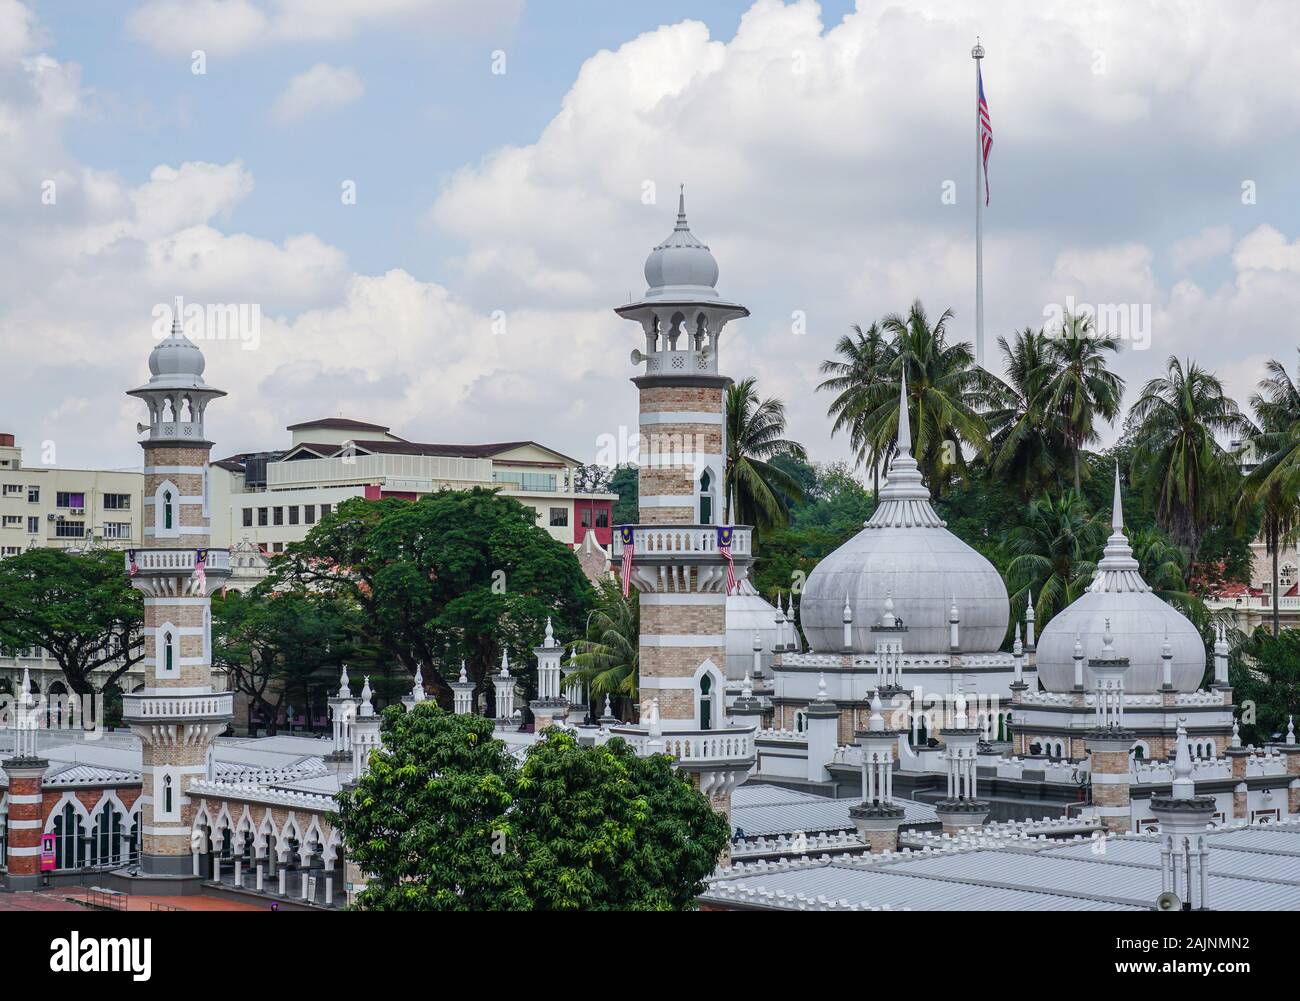 Kuala Lumpur, Malaysia - Aug 24, 2014. View of Masjid Jamek Mosque in Kuala Lumpur. The mosque was designed by Arthur Benison Hubback, and built in 19 Stock Photo